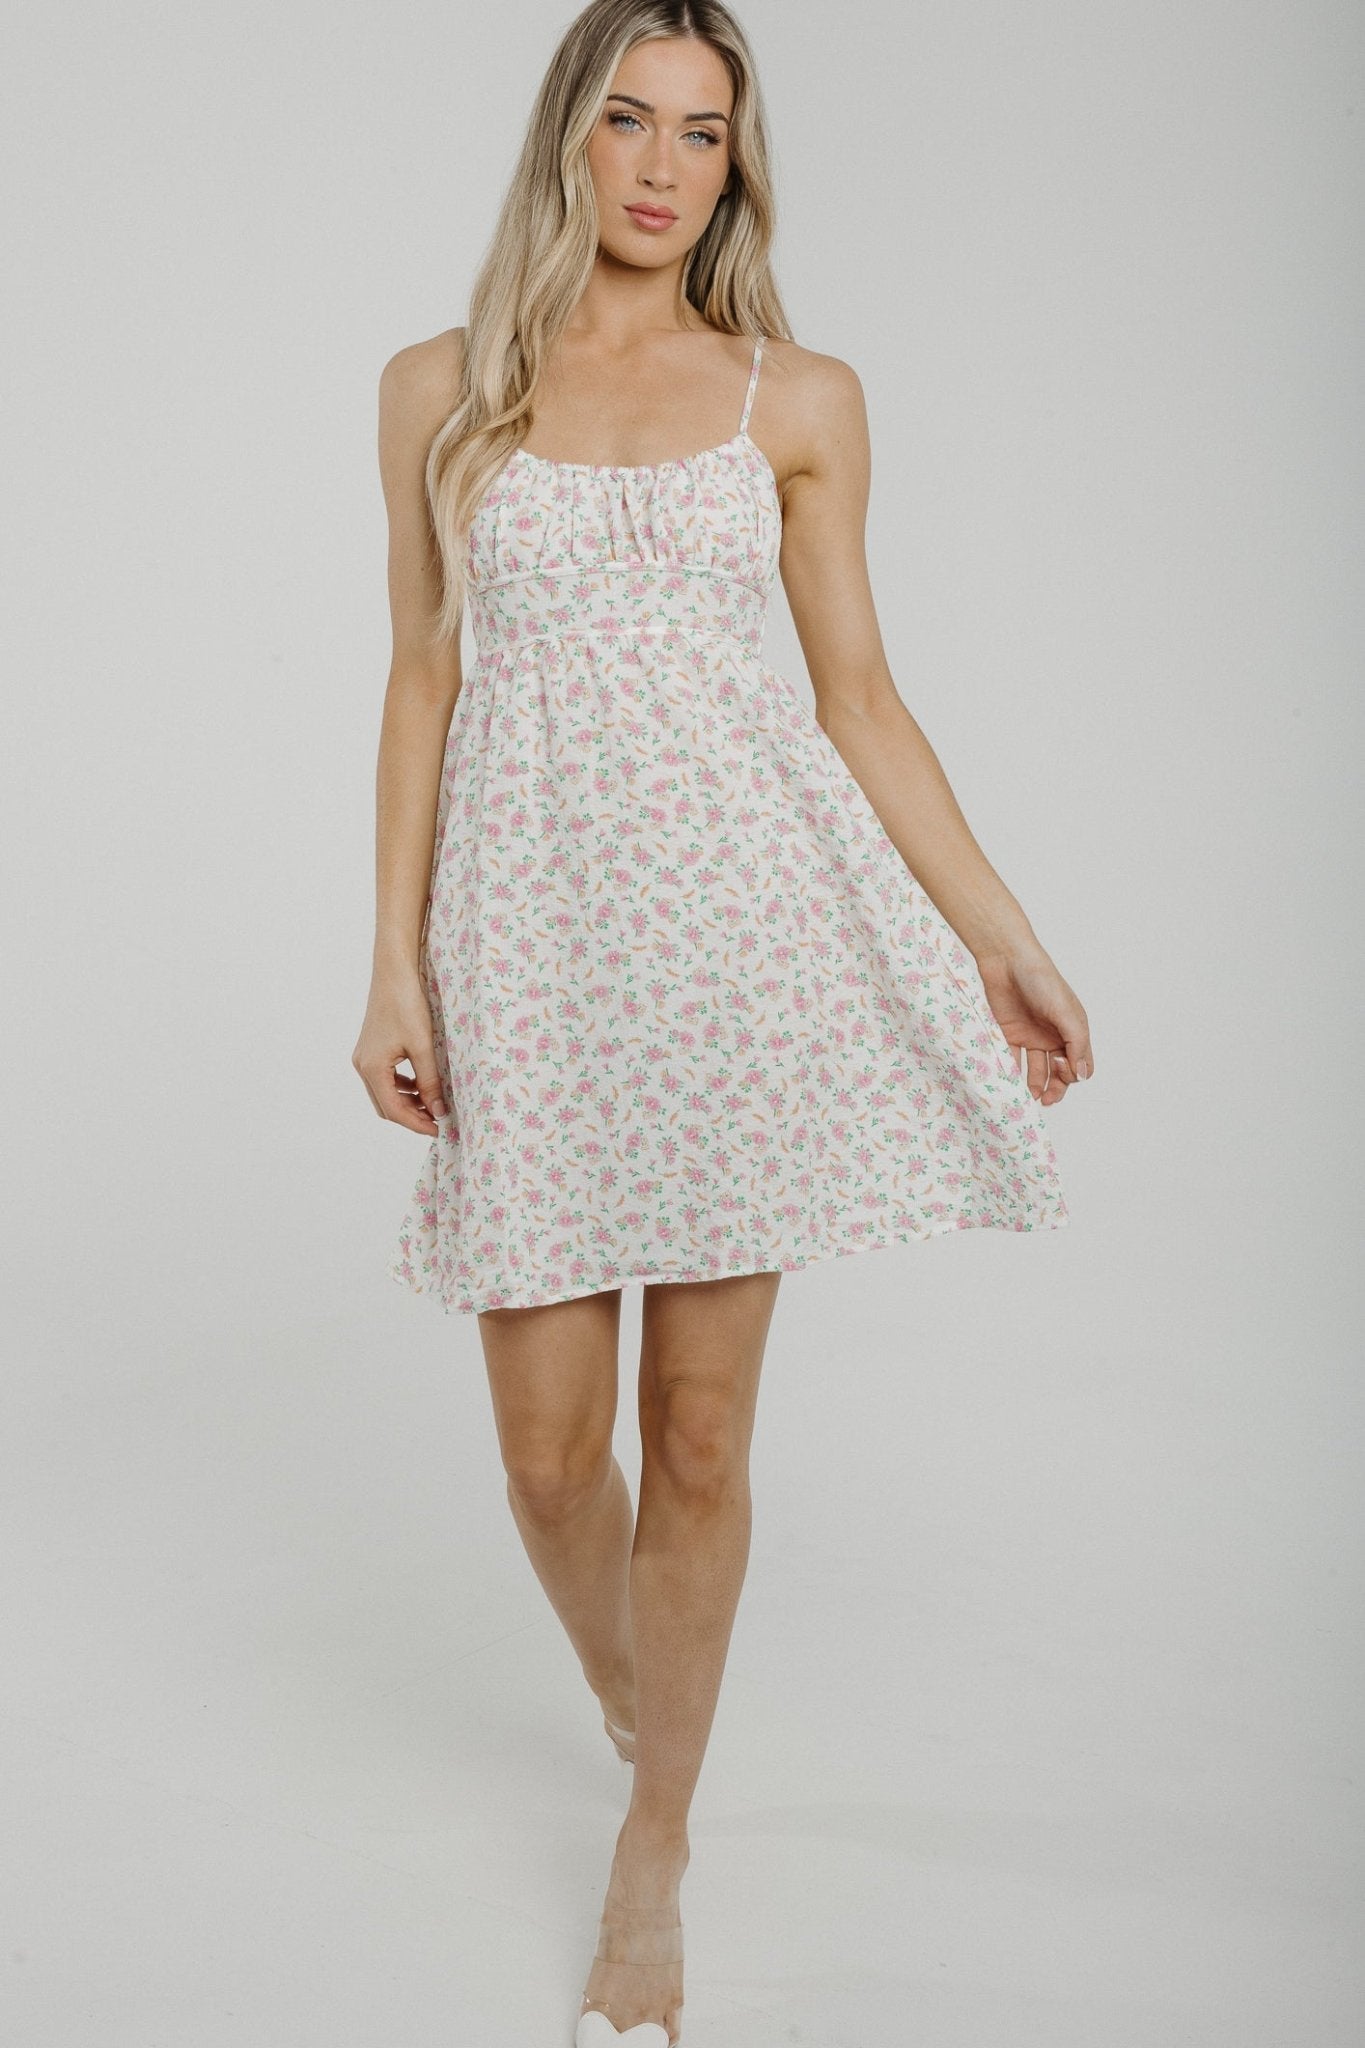 Lily Mini Dress In Pink Floral - The Walk in Wardrobe